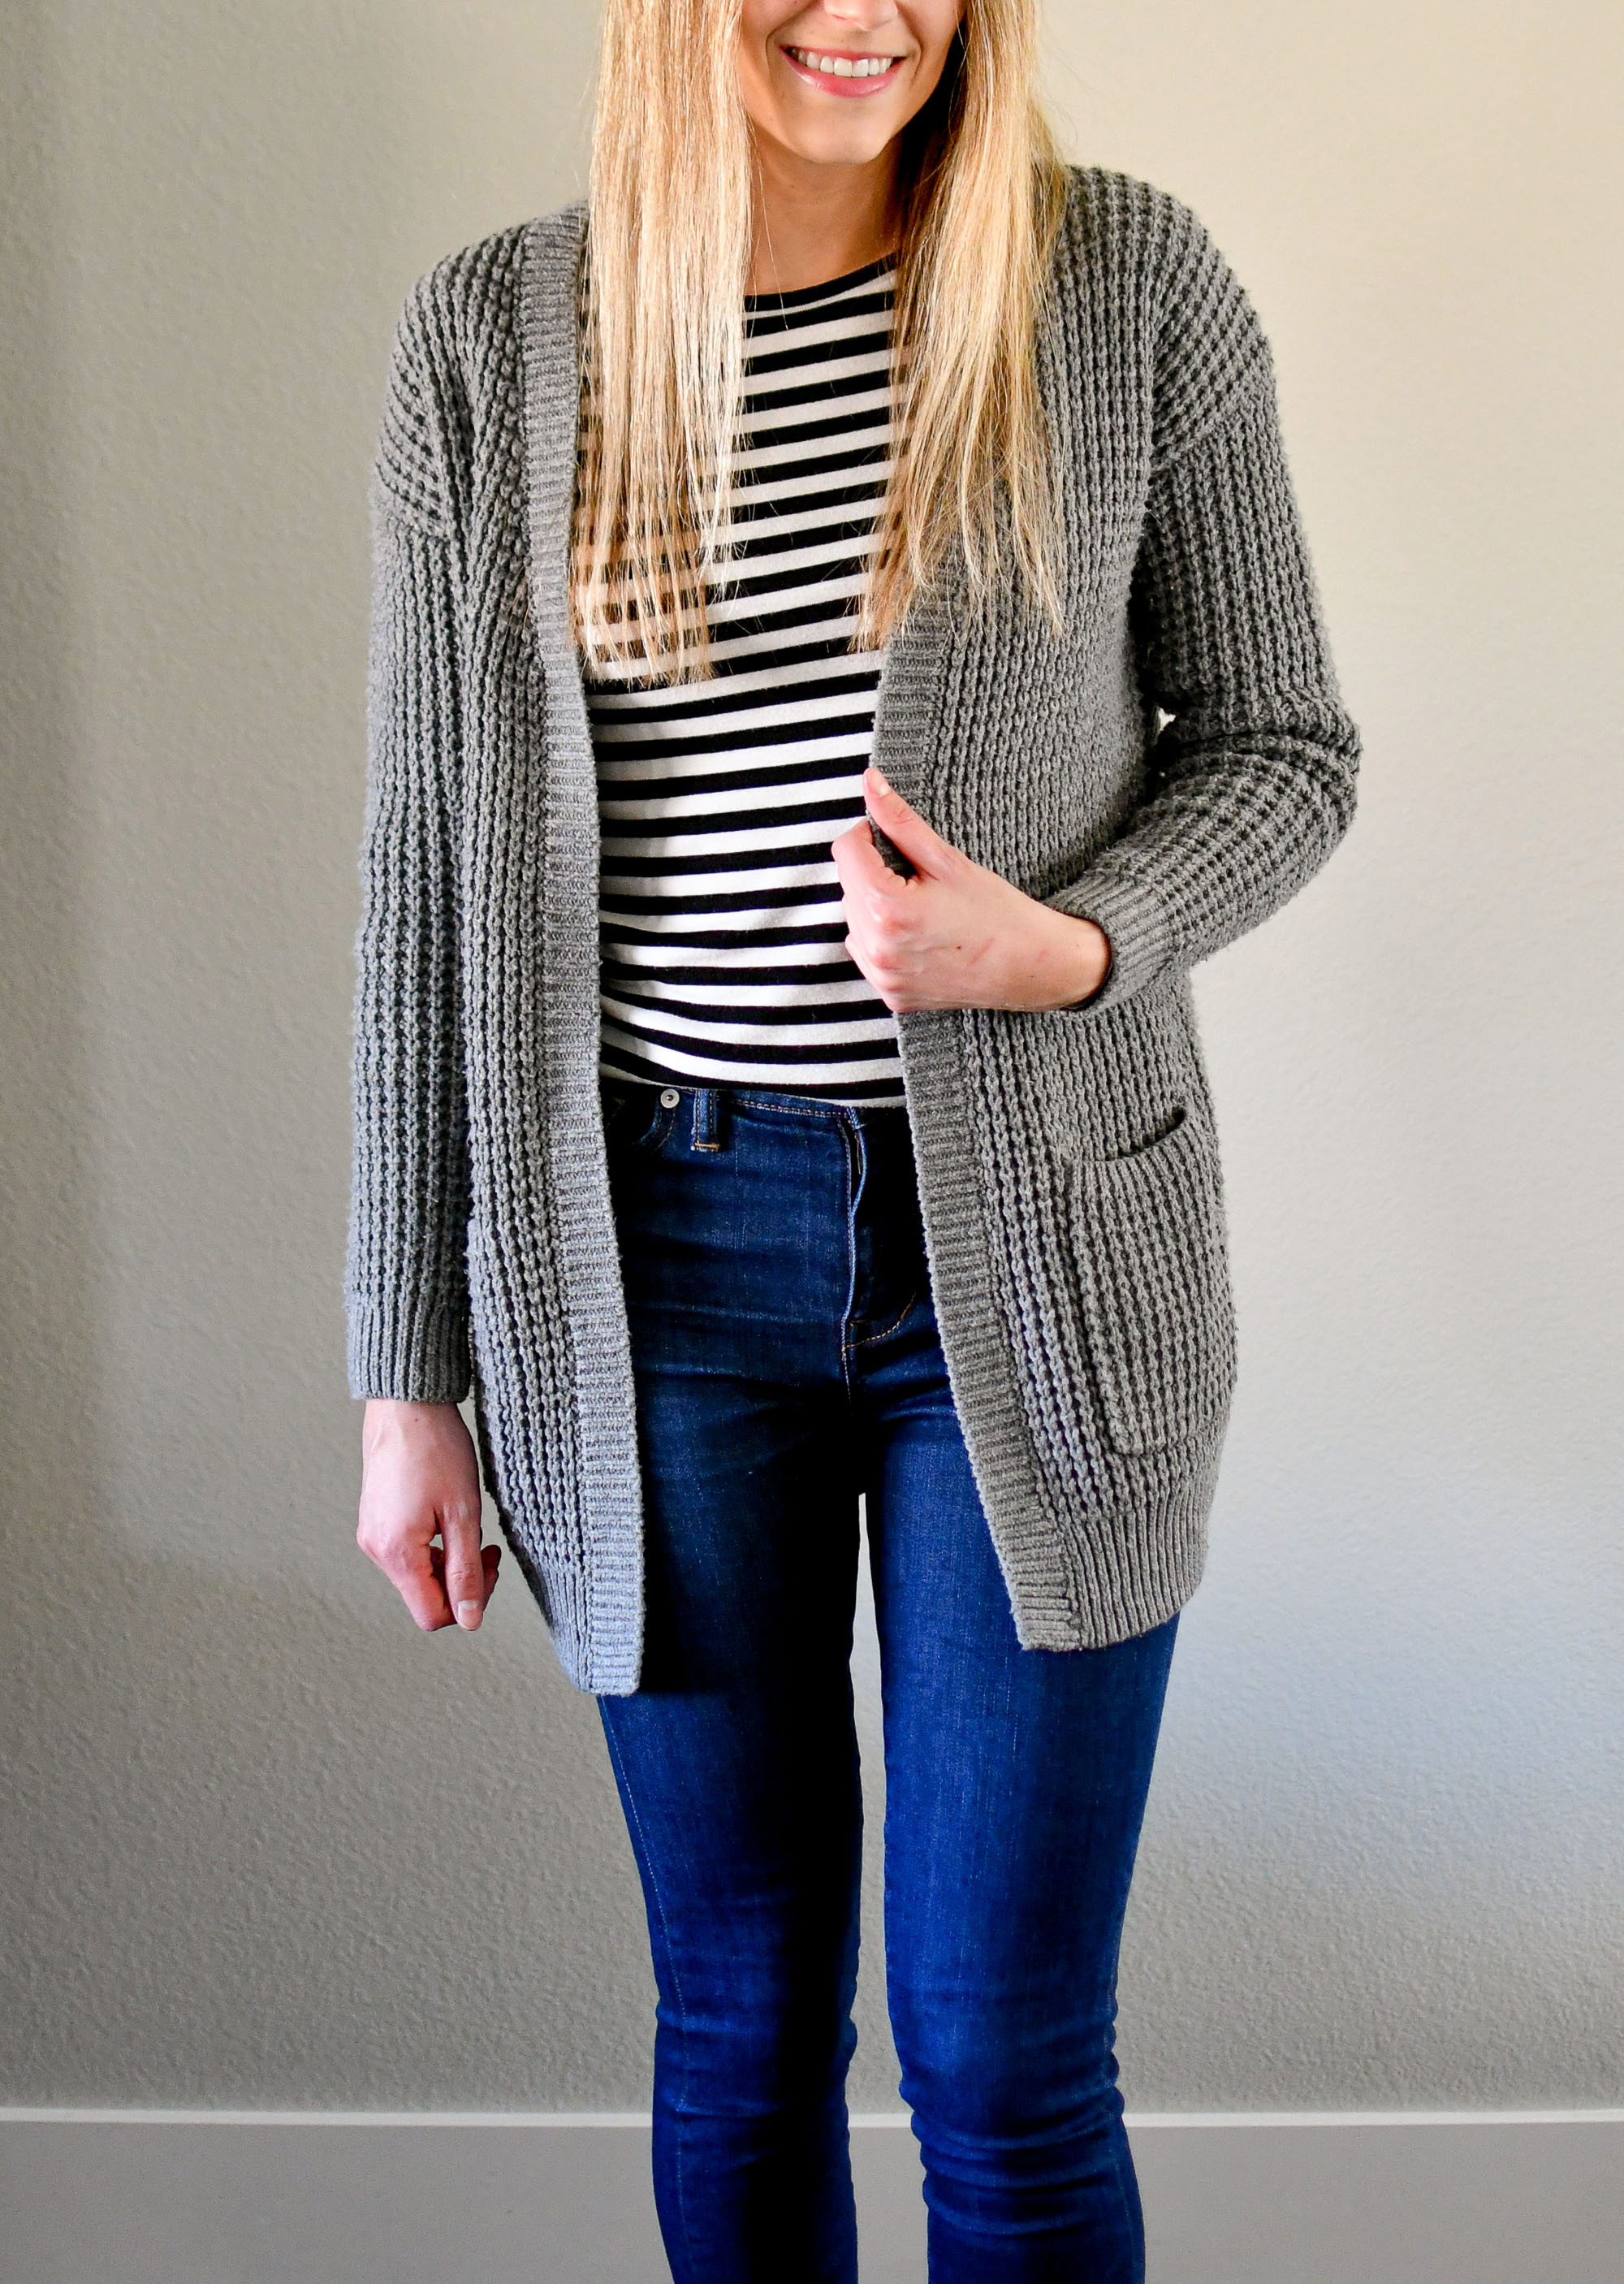 Grey cardigan casual winter outfit with striped tee — Cotton Cashmere Cat Hair